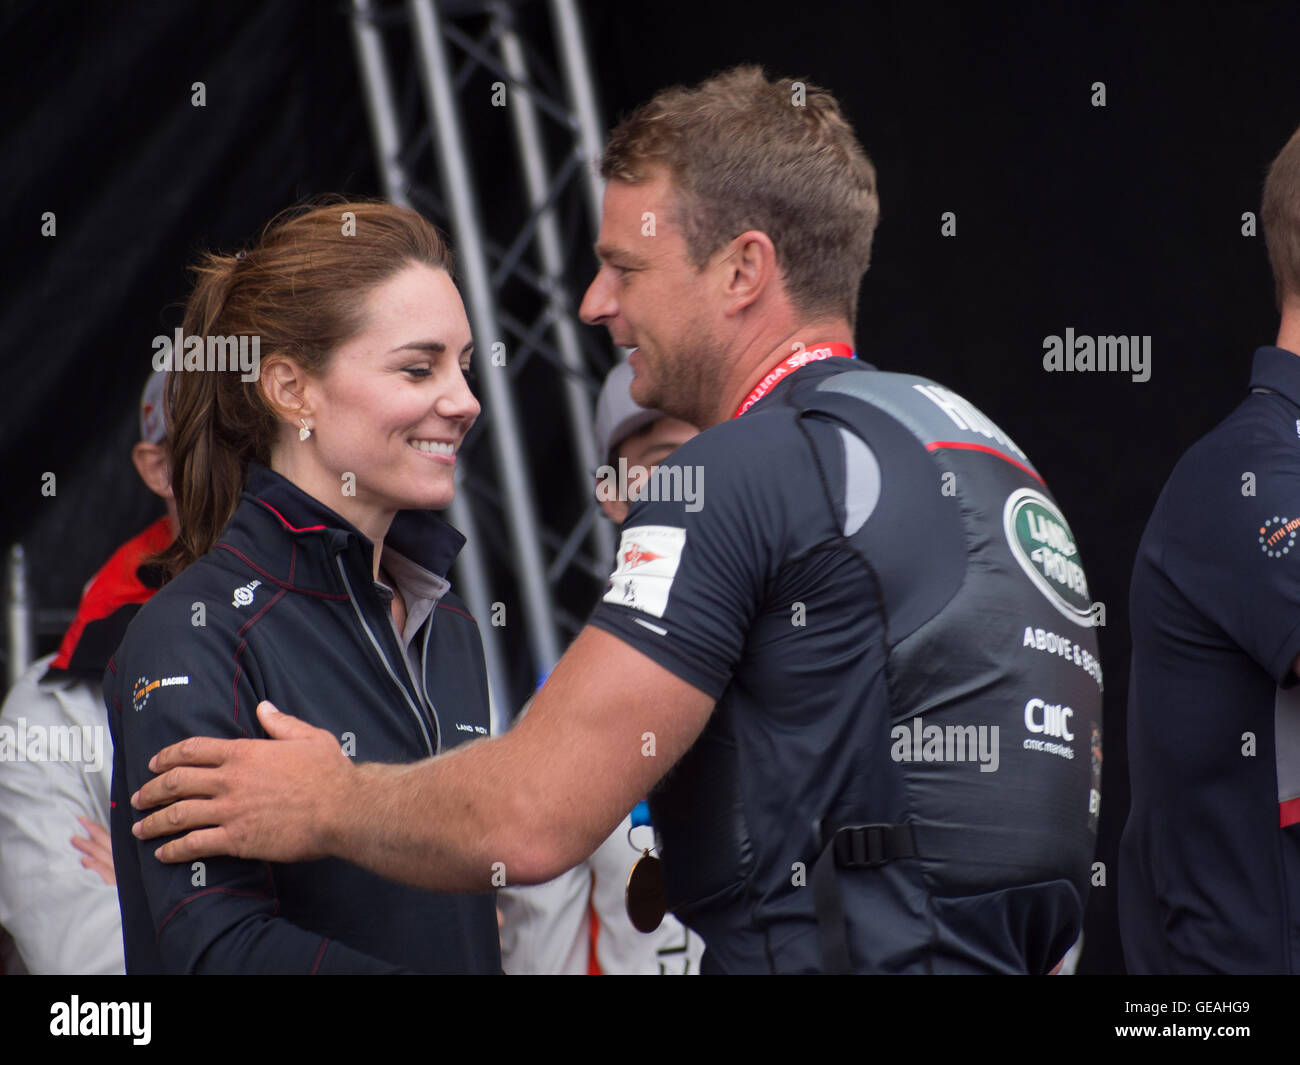 Portsmouth, UK, July 24 2016. Nick Hutton, Trimmer, with Land Rover BAR gives the Duchess of Cambridge a friendly pat on the arm as she presents him with the winners trophy at The Americas Cup World Series in Portsmouth. Credit:  simon evans/Alamy Live News Stock Photo